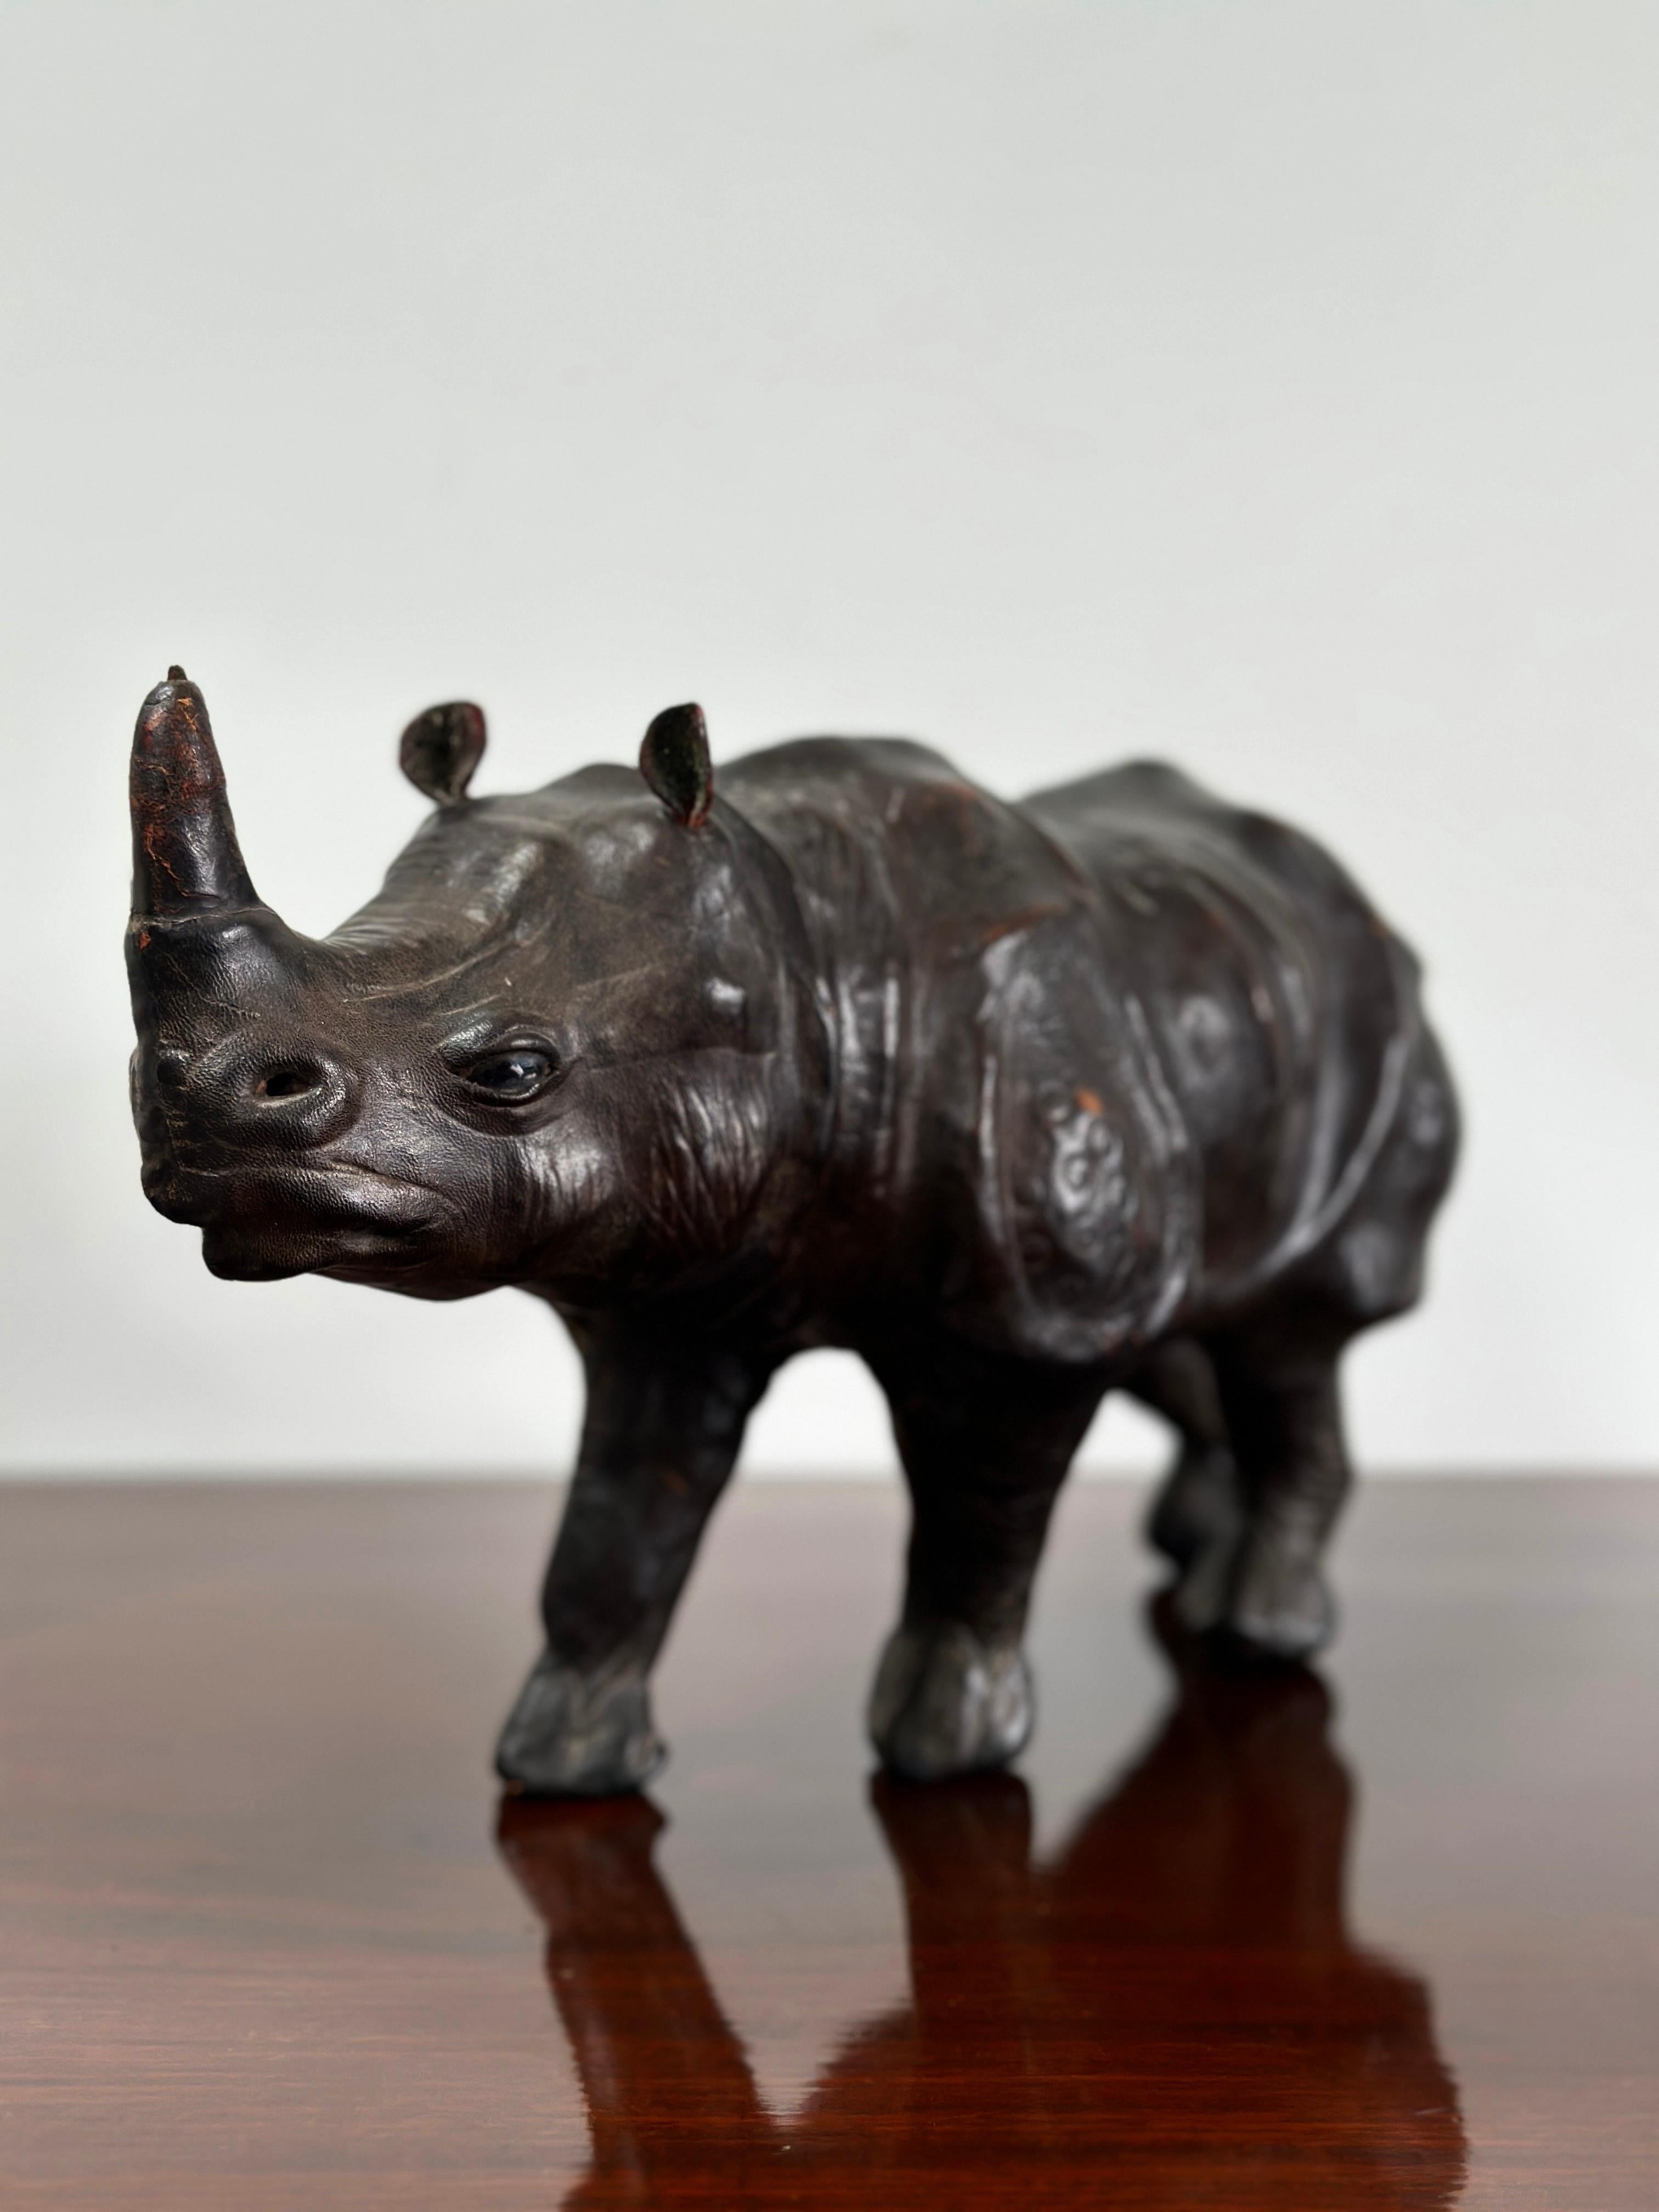 - A most impressive leather rhino which was possibly used as a maquette for bronze casting, England circa 1900.
- Maquettes were an artists way of practicing their initial ideas before committing to the more expensive materials or full size of a